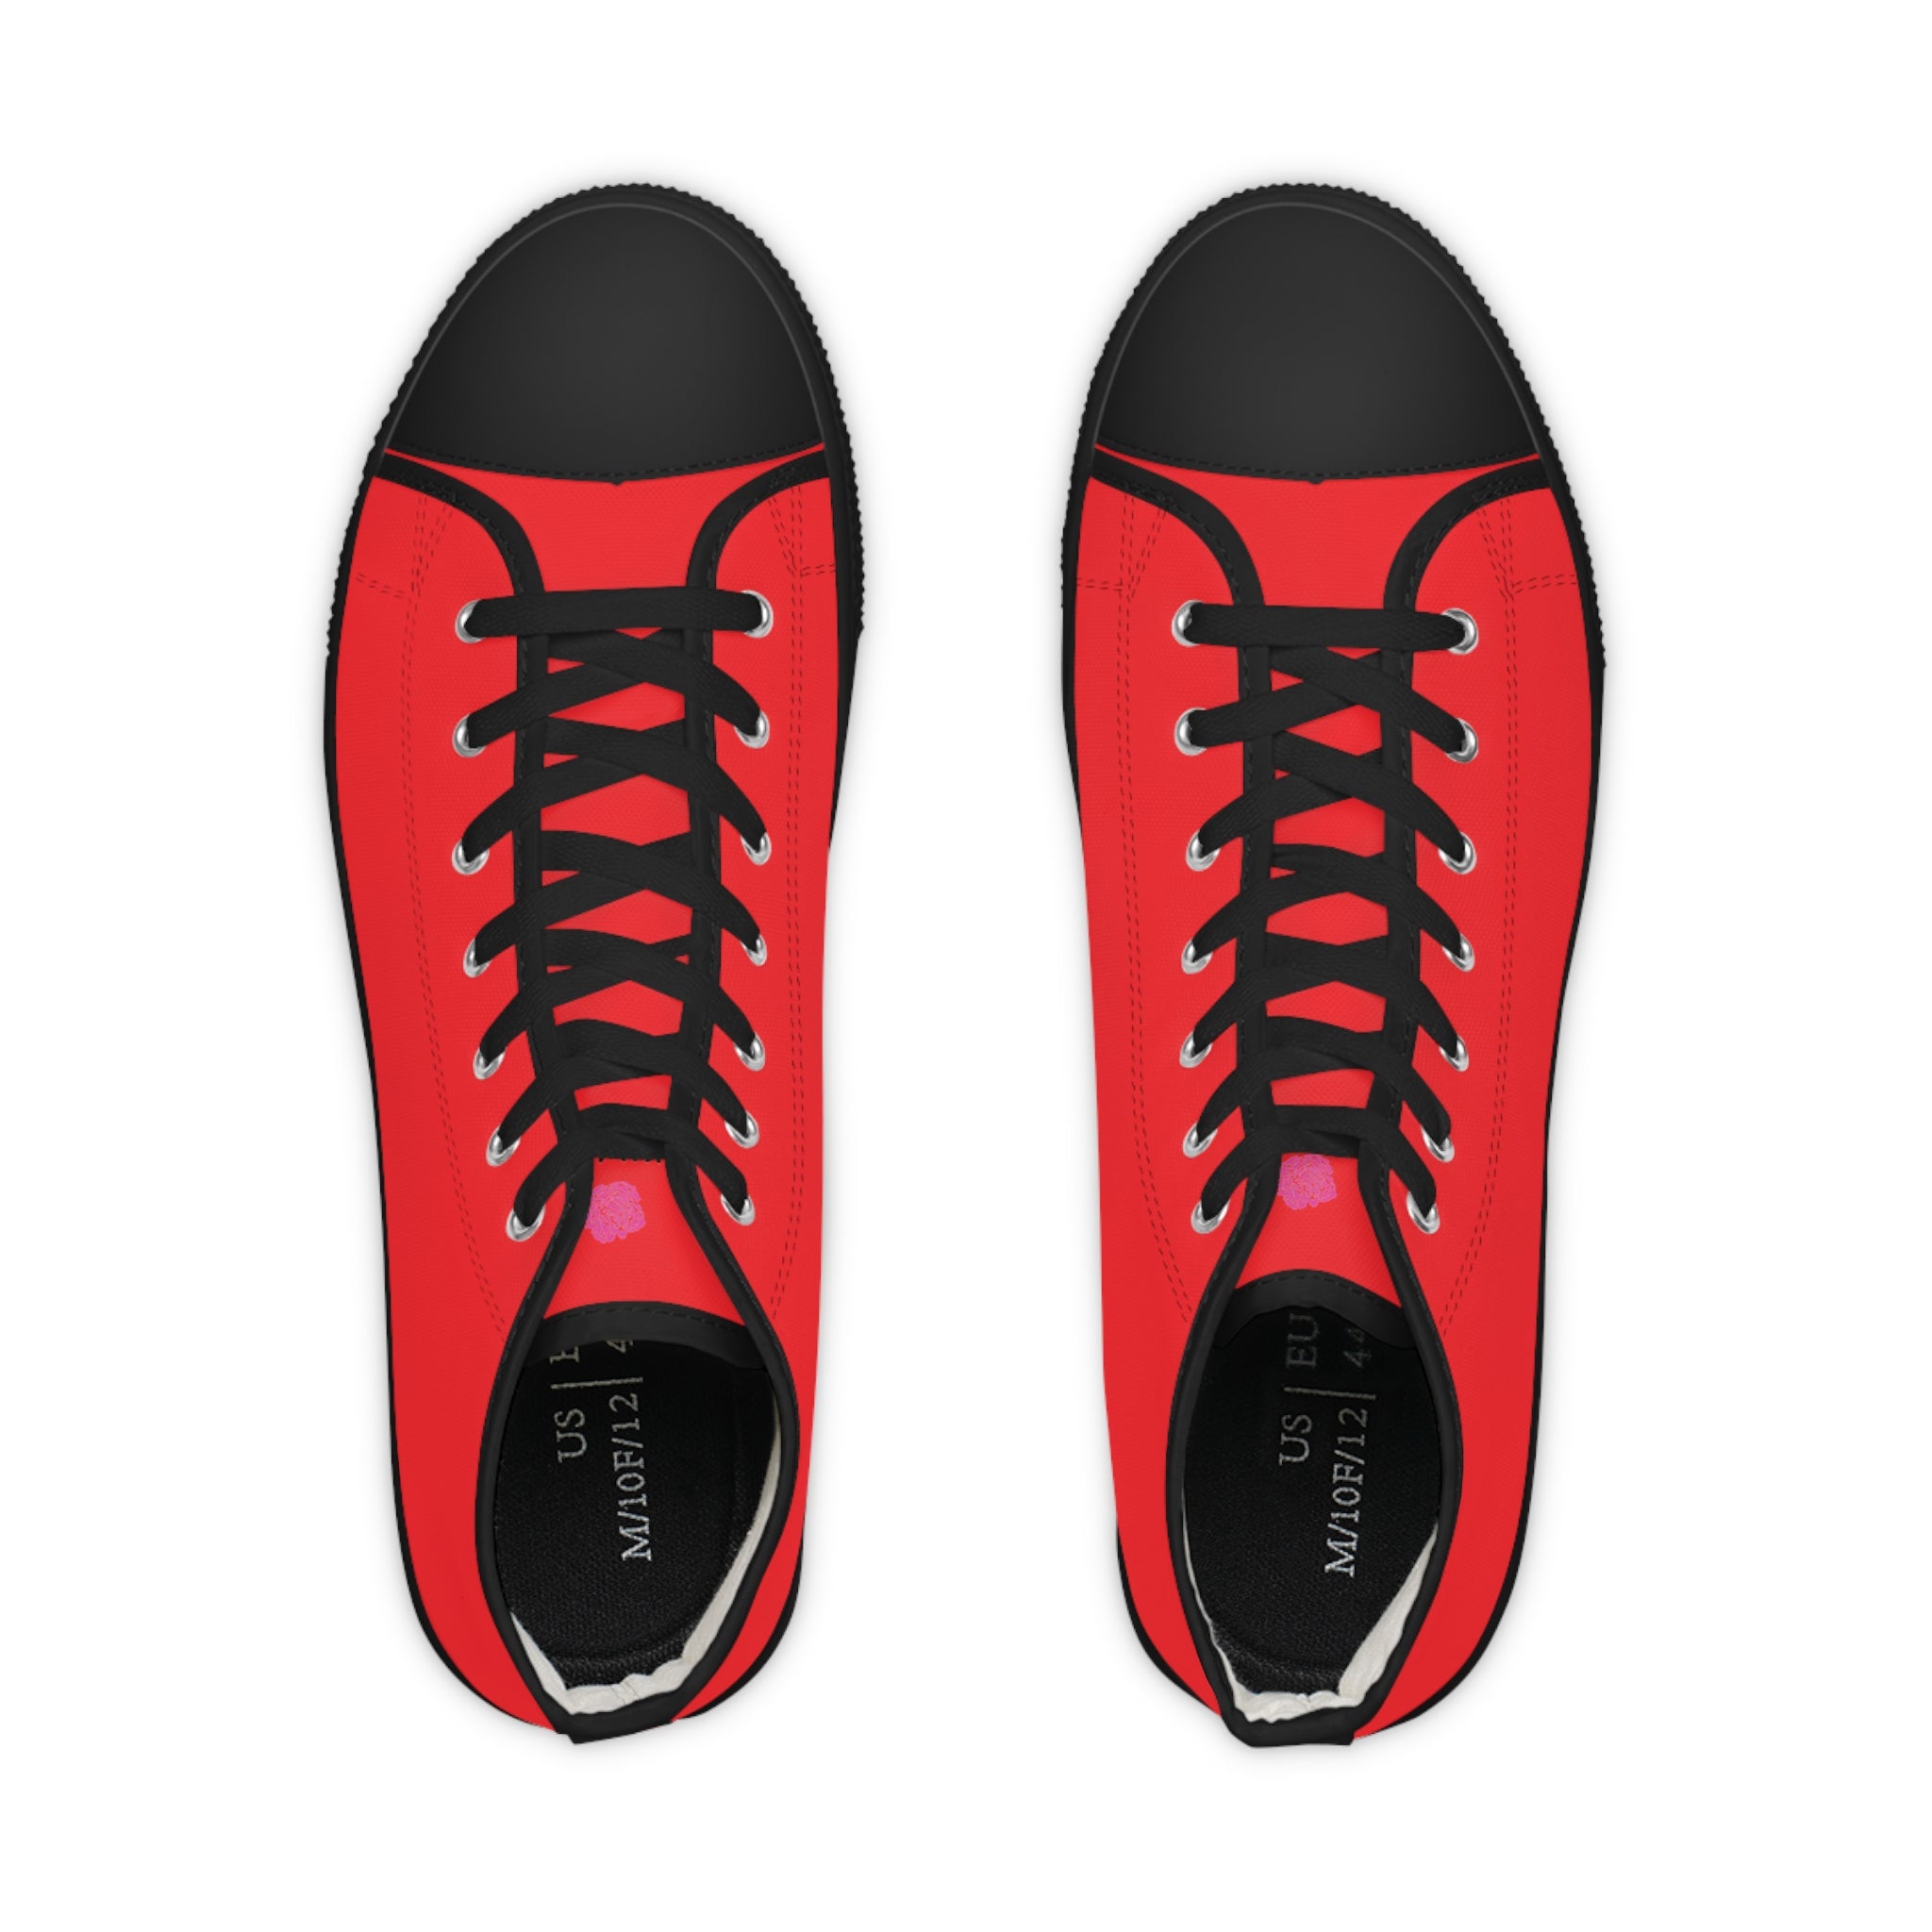 Red Color Men's High Tops, Modern Minimalist Solid Red Color Best Men's High Top Laced Up Black or White Style Breathable Fashion Canvas Sneakers Tennis Athletic Style Shoes For Men (US Size: 5-14)